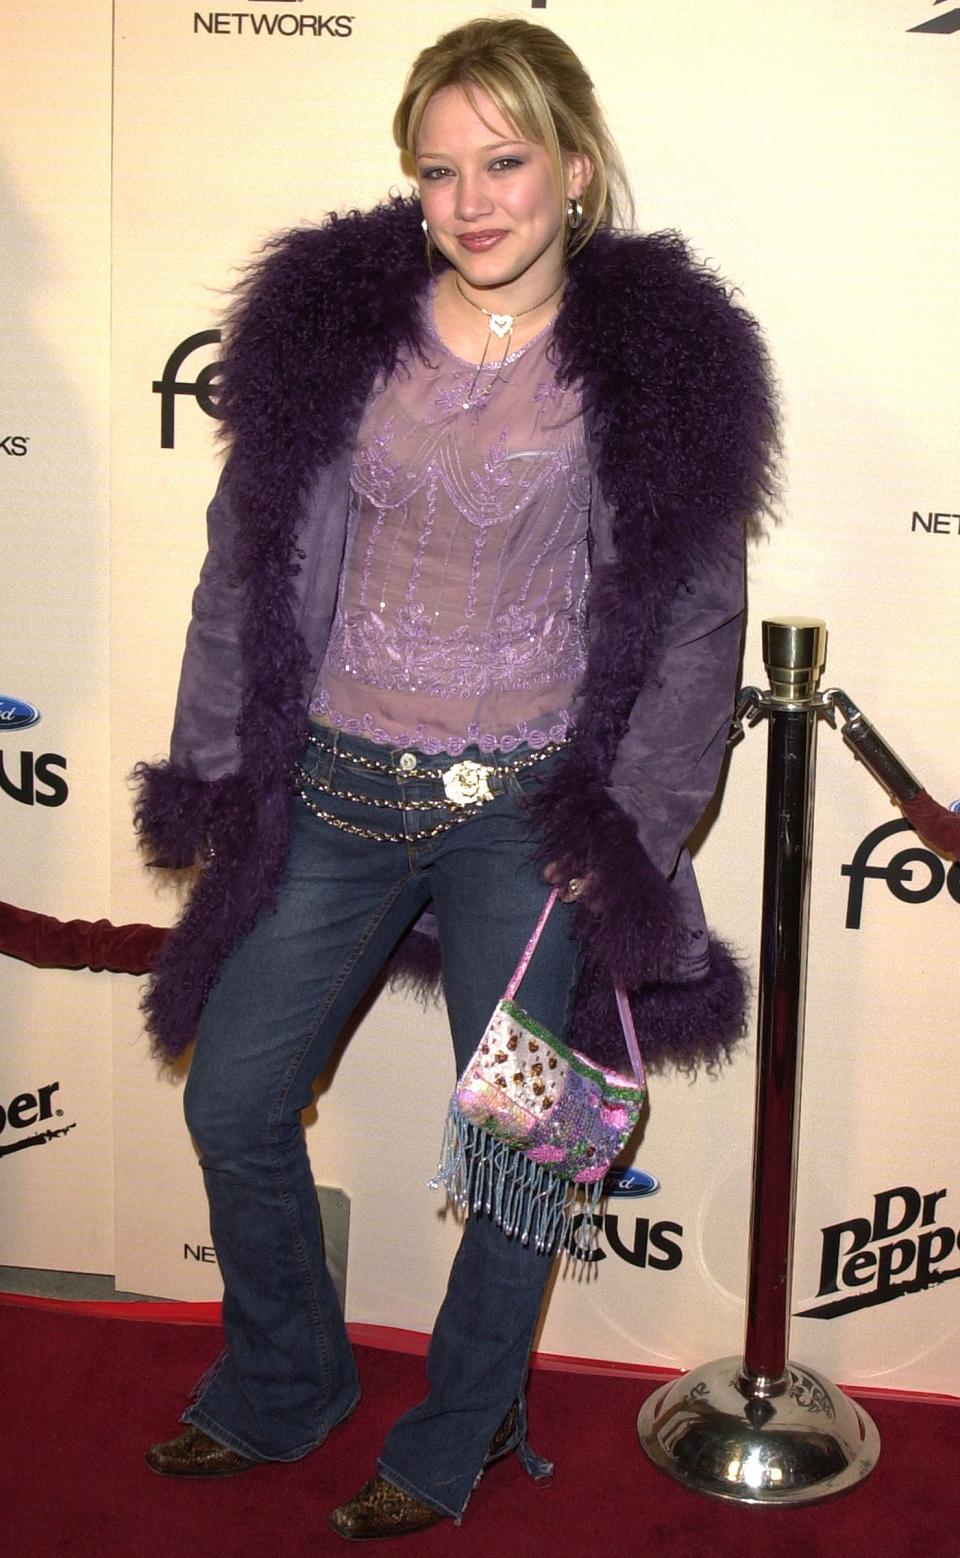 Between the beaded bag, the fur-trimmed purple coat, matching purple lace shirt and chain belts, there is so much happening here. 